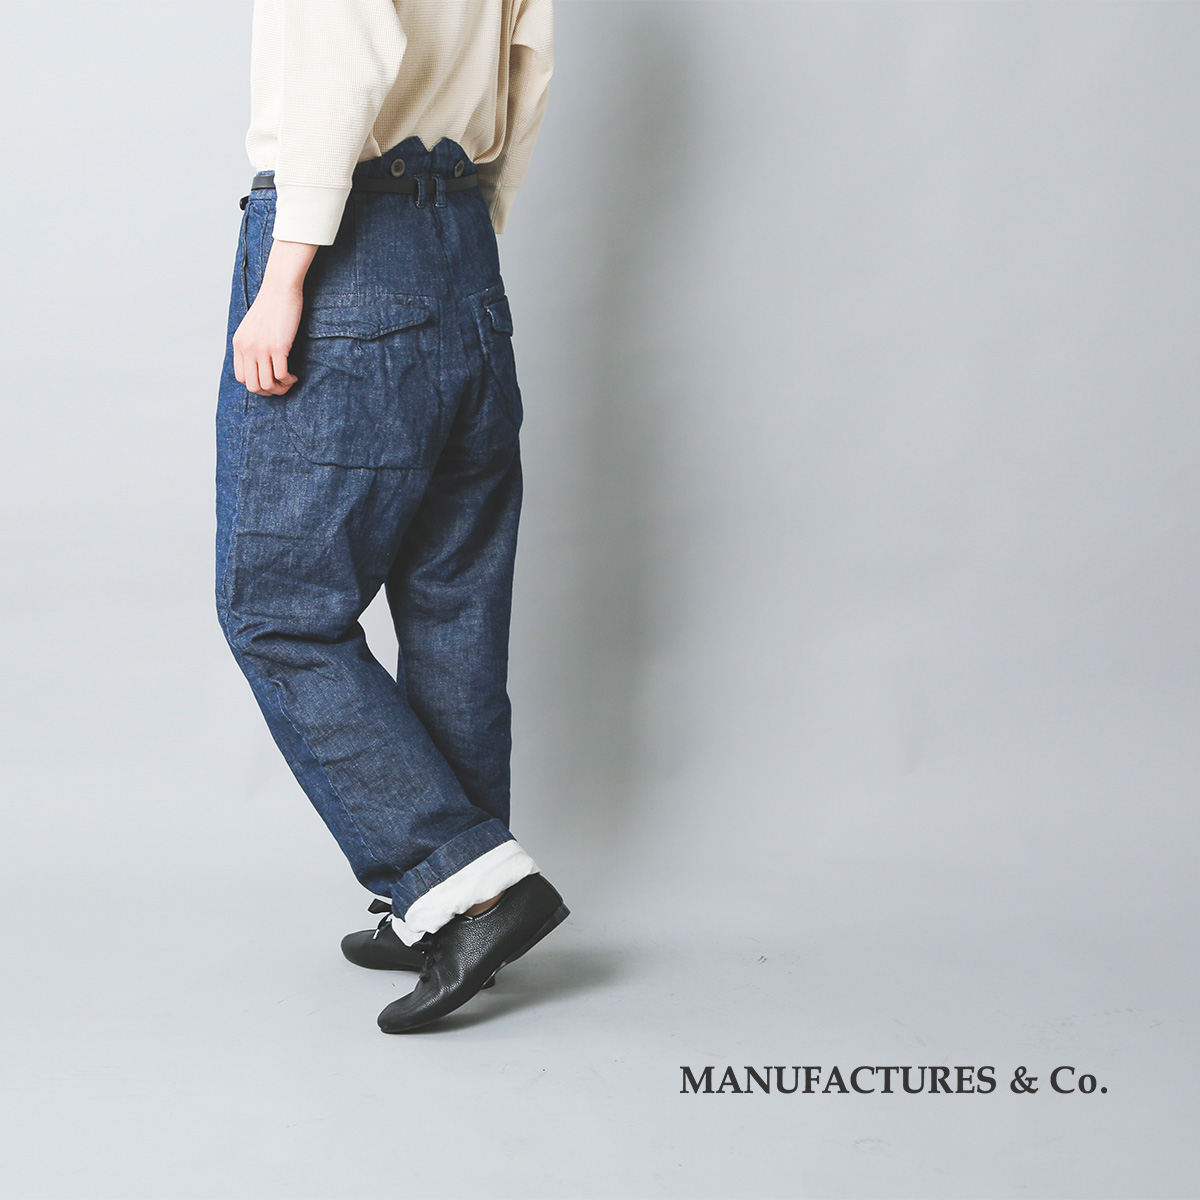 Manufactures&Co.(マニュファクチャーズアンドコー)デニムワーカートラウザーズパンツ worker-trousers